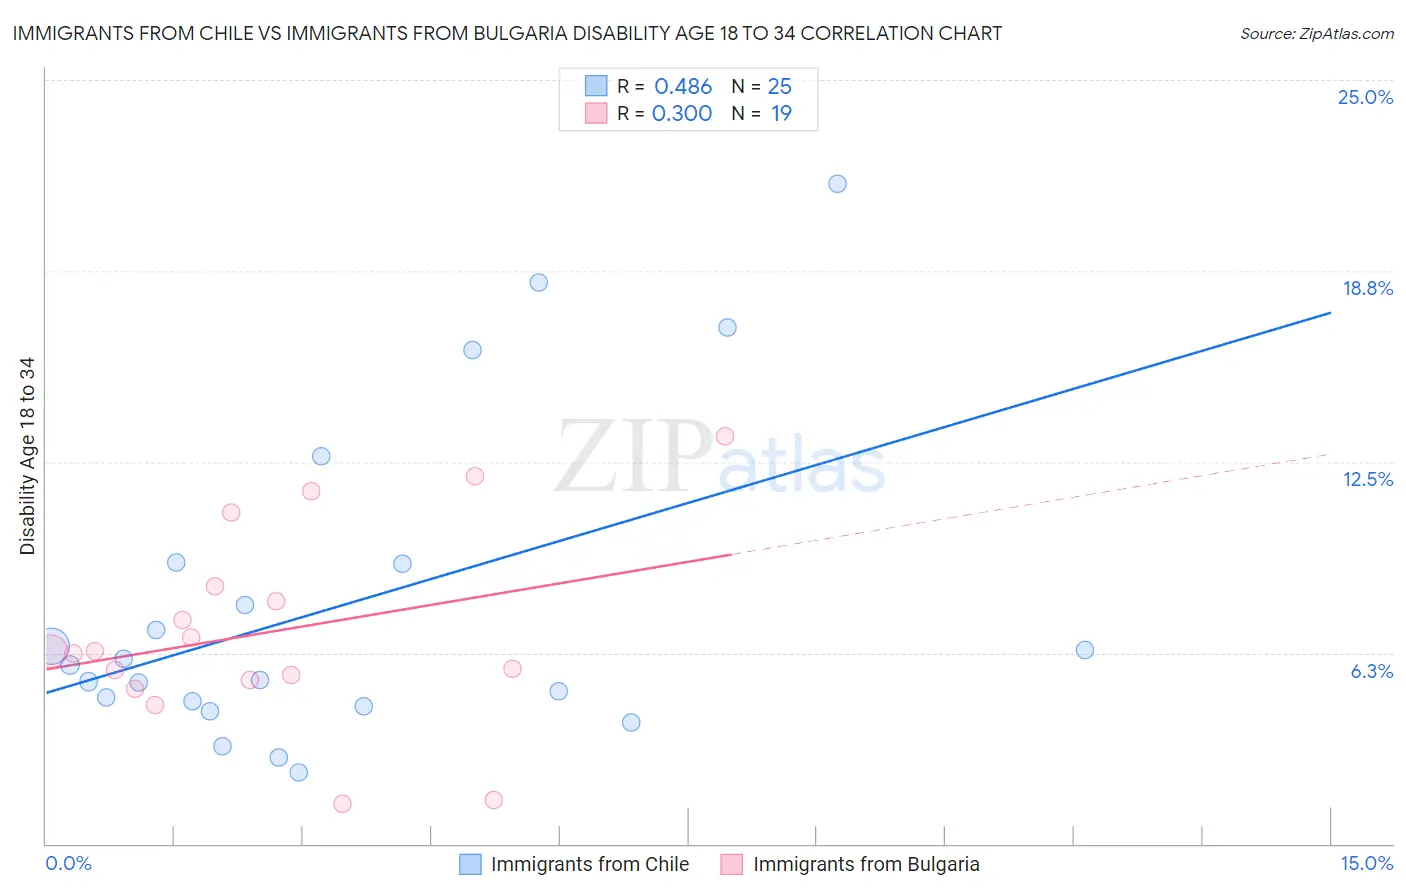 Immigrants from Chile vs Immigrants from Bulgaria Disability Age 18 to 34